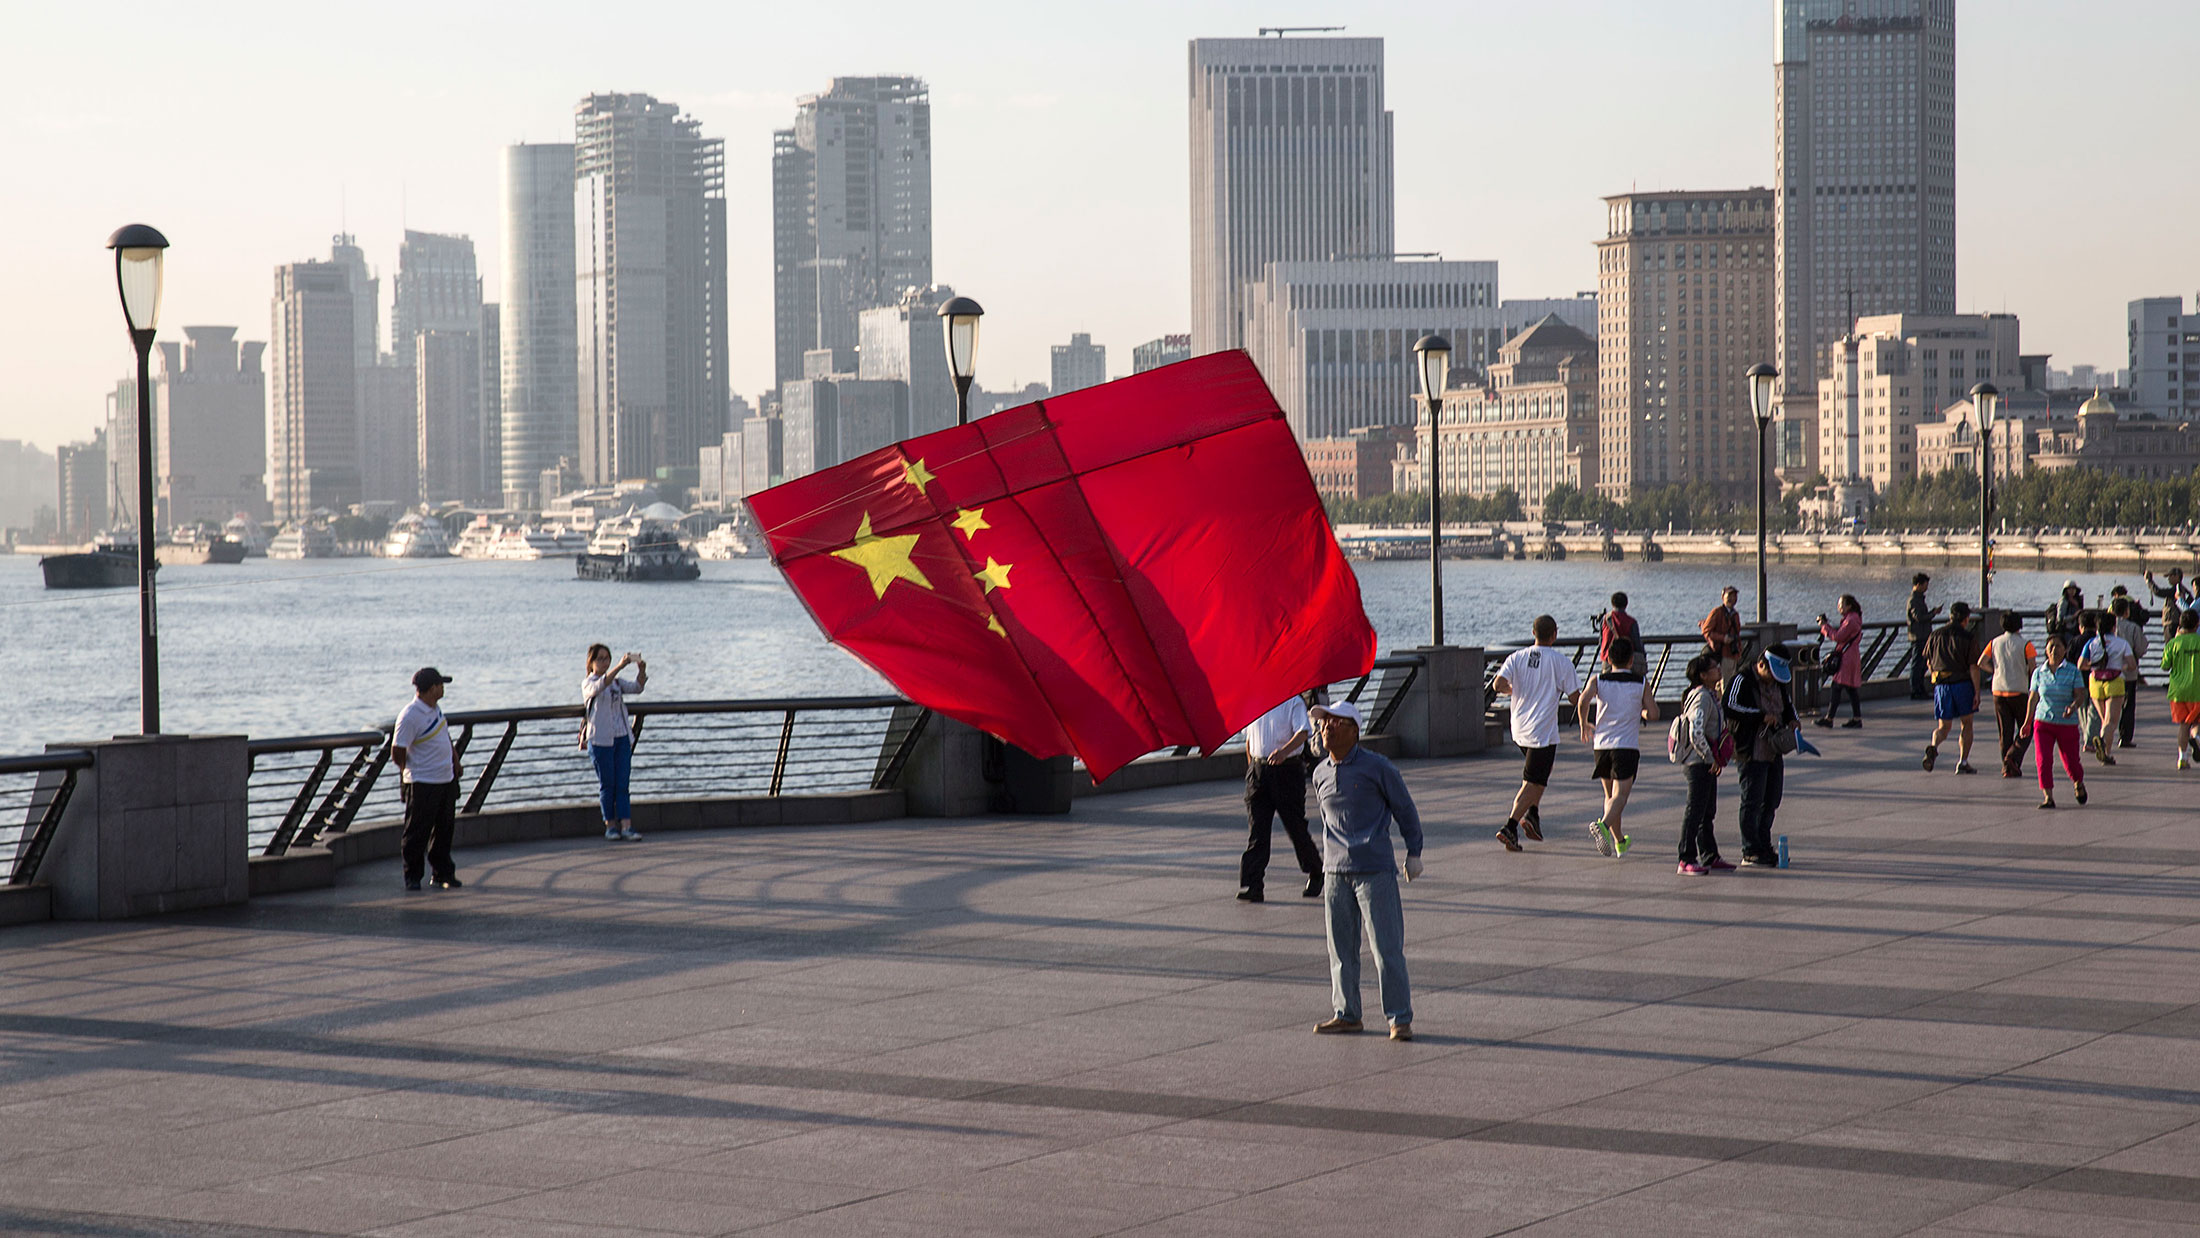 A man launches a kite in the shape of the Chinese national flag on the Bund in Shanghai. China’s policymakers are seeking ways to clean up mounting bad loans at the nation’s banks, which are at their highest levels in a decade amid slowing economic growth and government moves to curb overcapacity in manufacturing.
